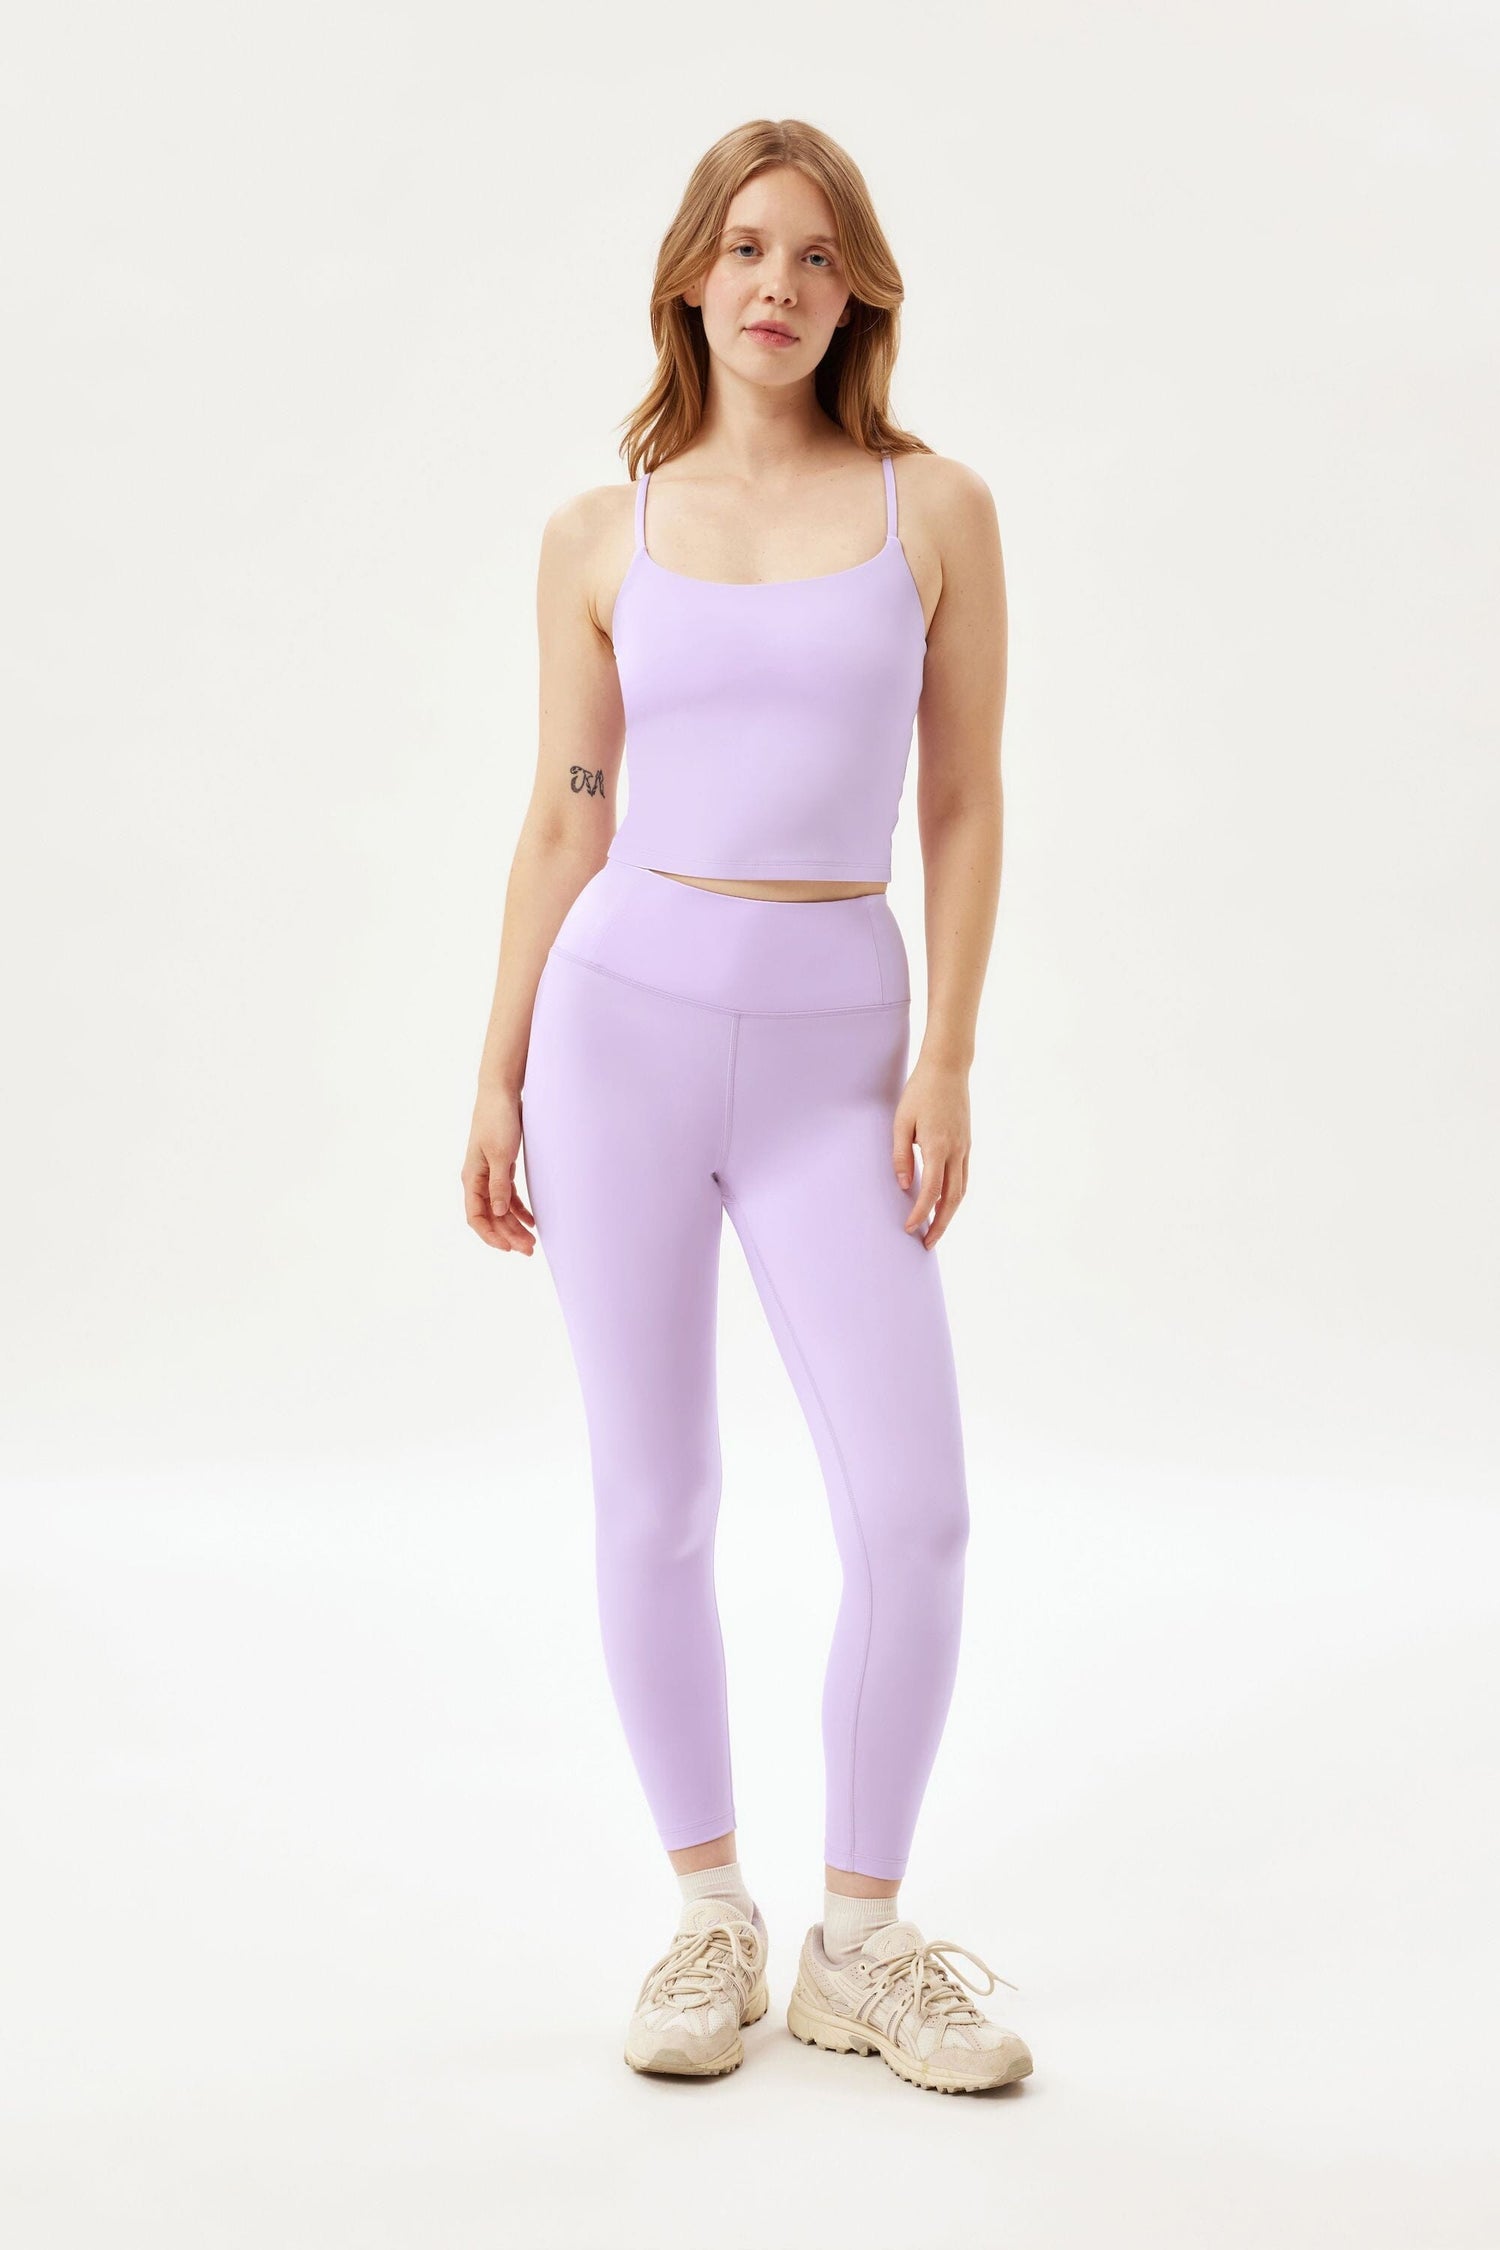 Girlfriend Collective W's Float High-Rise Legging - Made from Recycled plastic bottles Bellflower Normal Pants